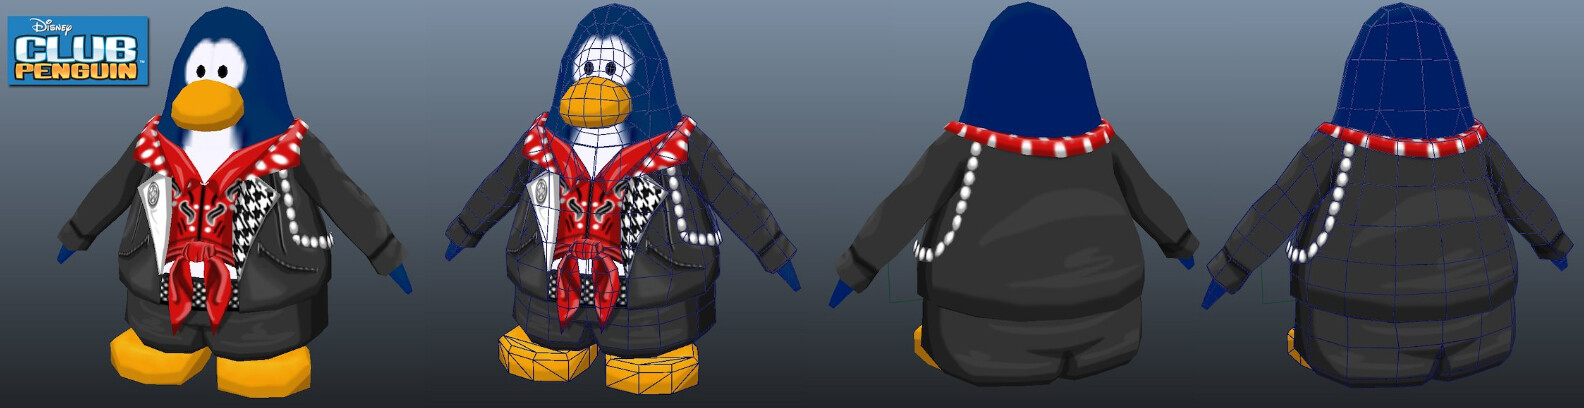 One of the costumes that I modeled and textured for Disney's Club Penguin. (Penguin model created by another artist)